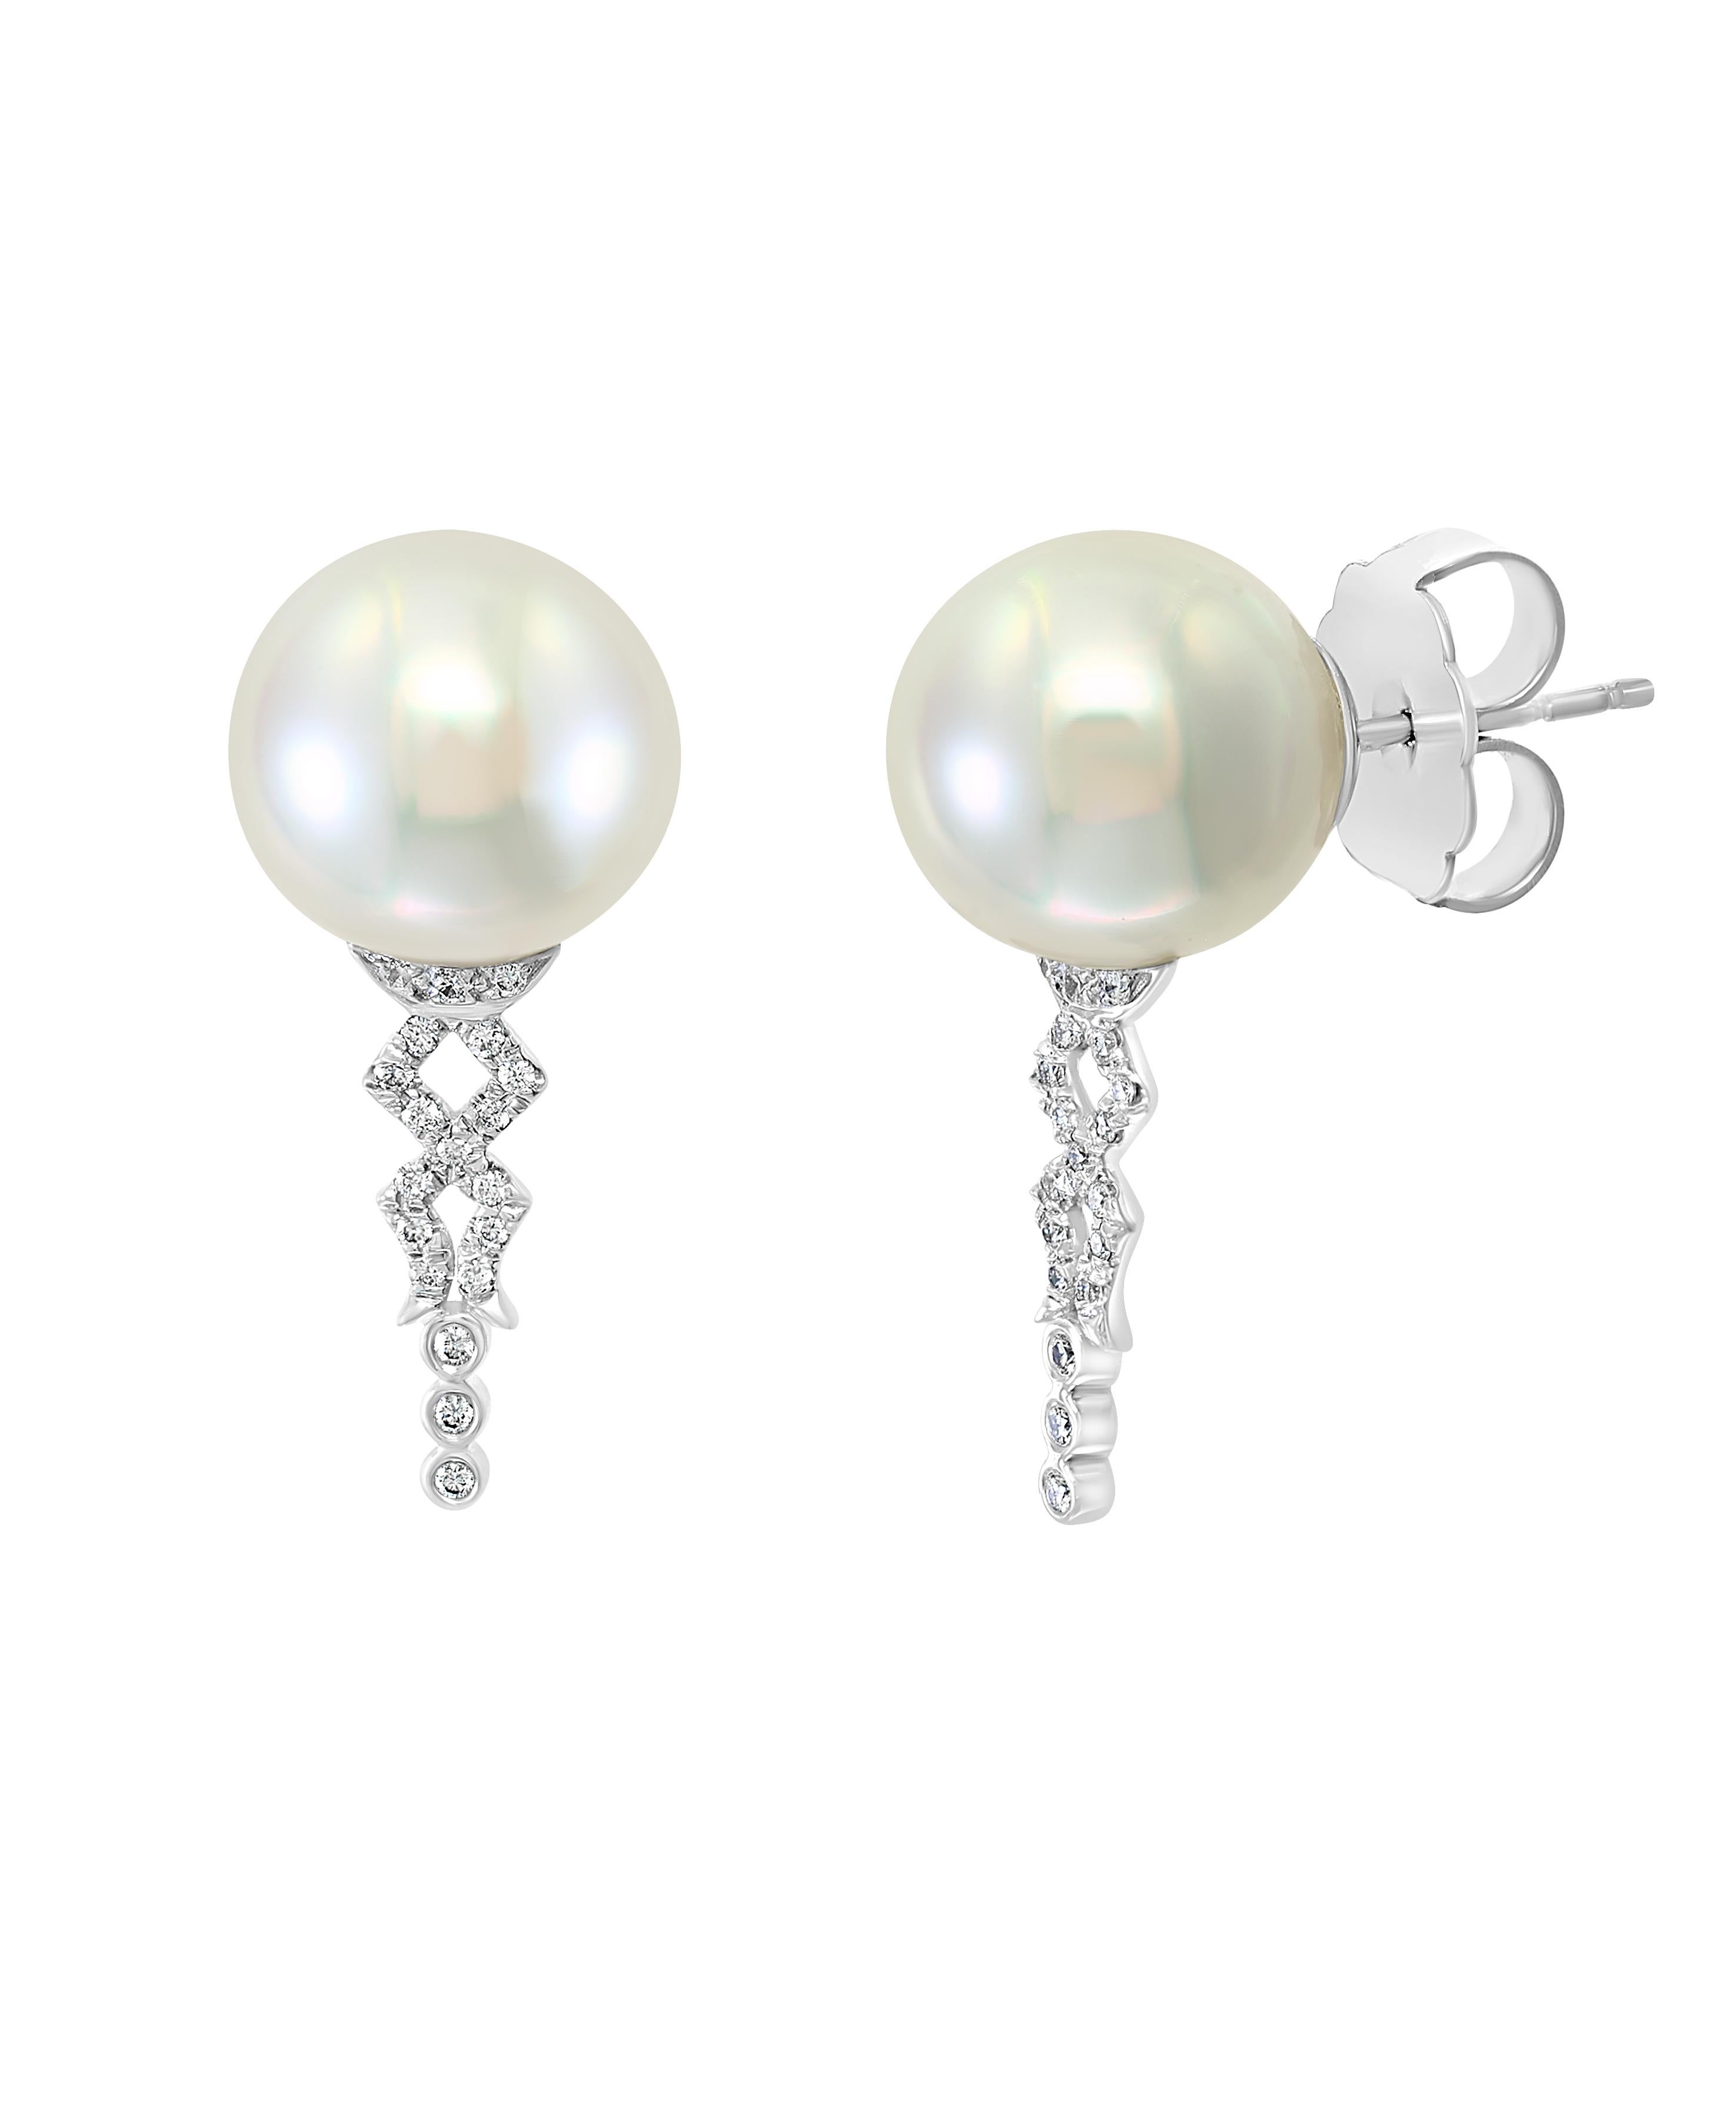 These elegant Diamond and Pearl earrings feature South Sea white round cultured pearls gracefully accentuated by diamonds set in white gold. The classic design of these earrings is perfect for the working woman or for an evening out on the town.
-